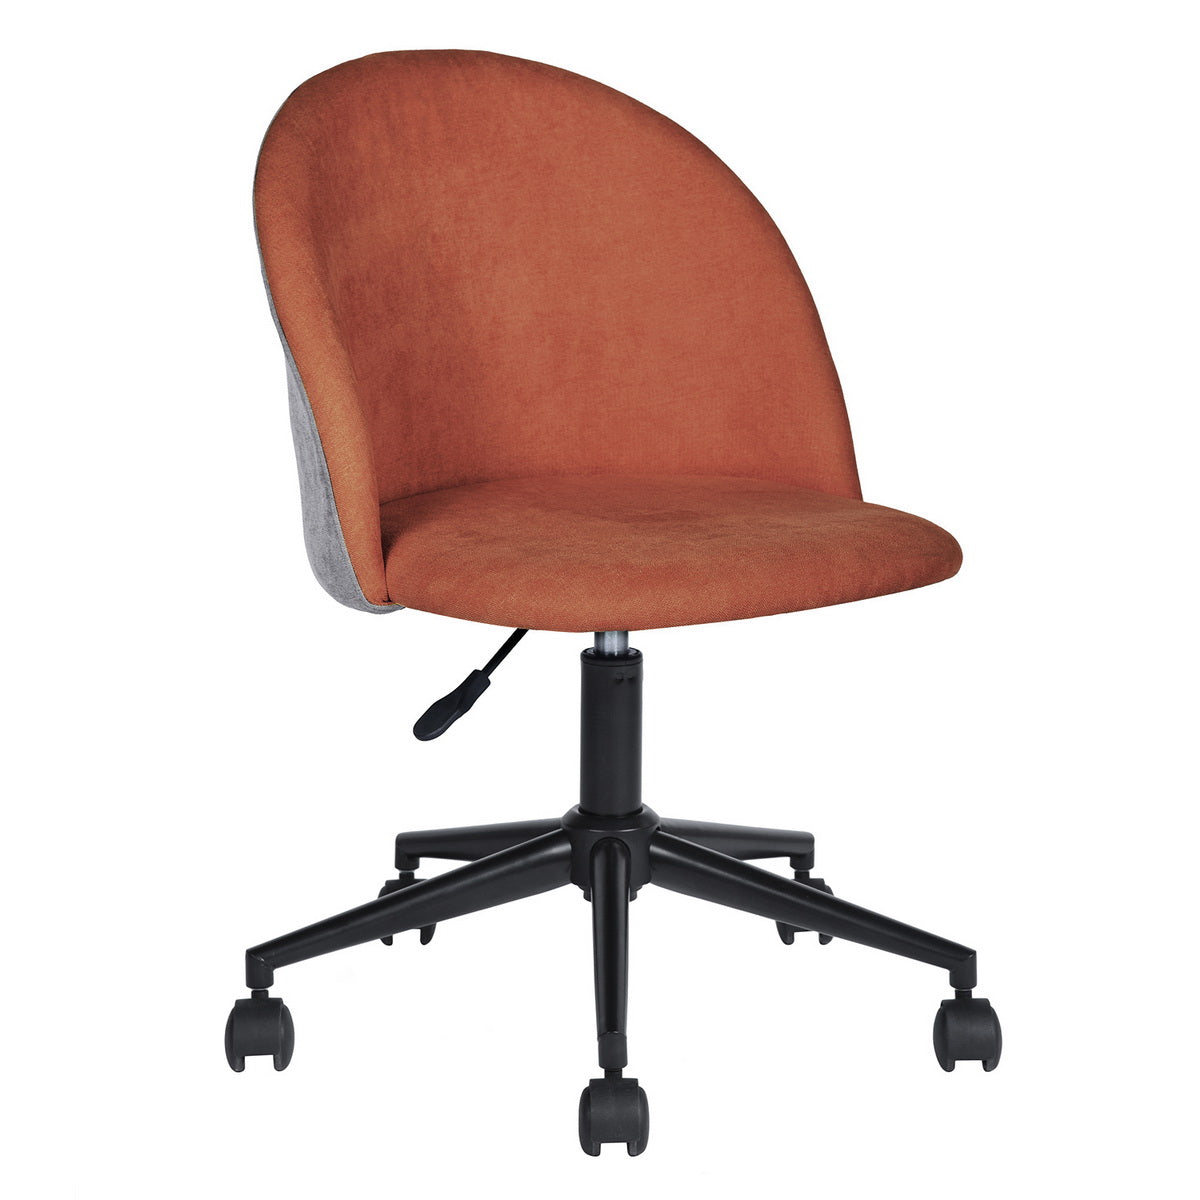 Fabric Upholstery Adjustable Office Chair Task Chair Desk Chair Armless Chair with Swivel Casters